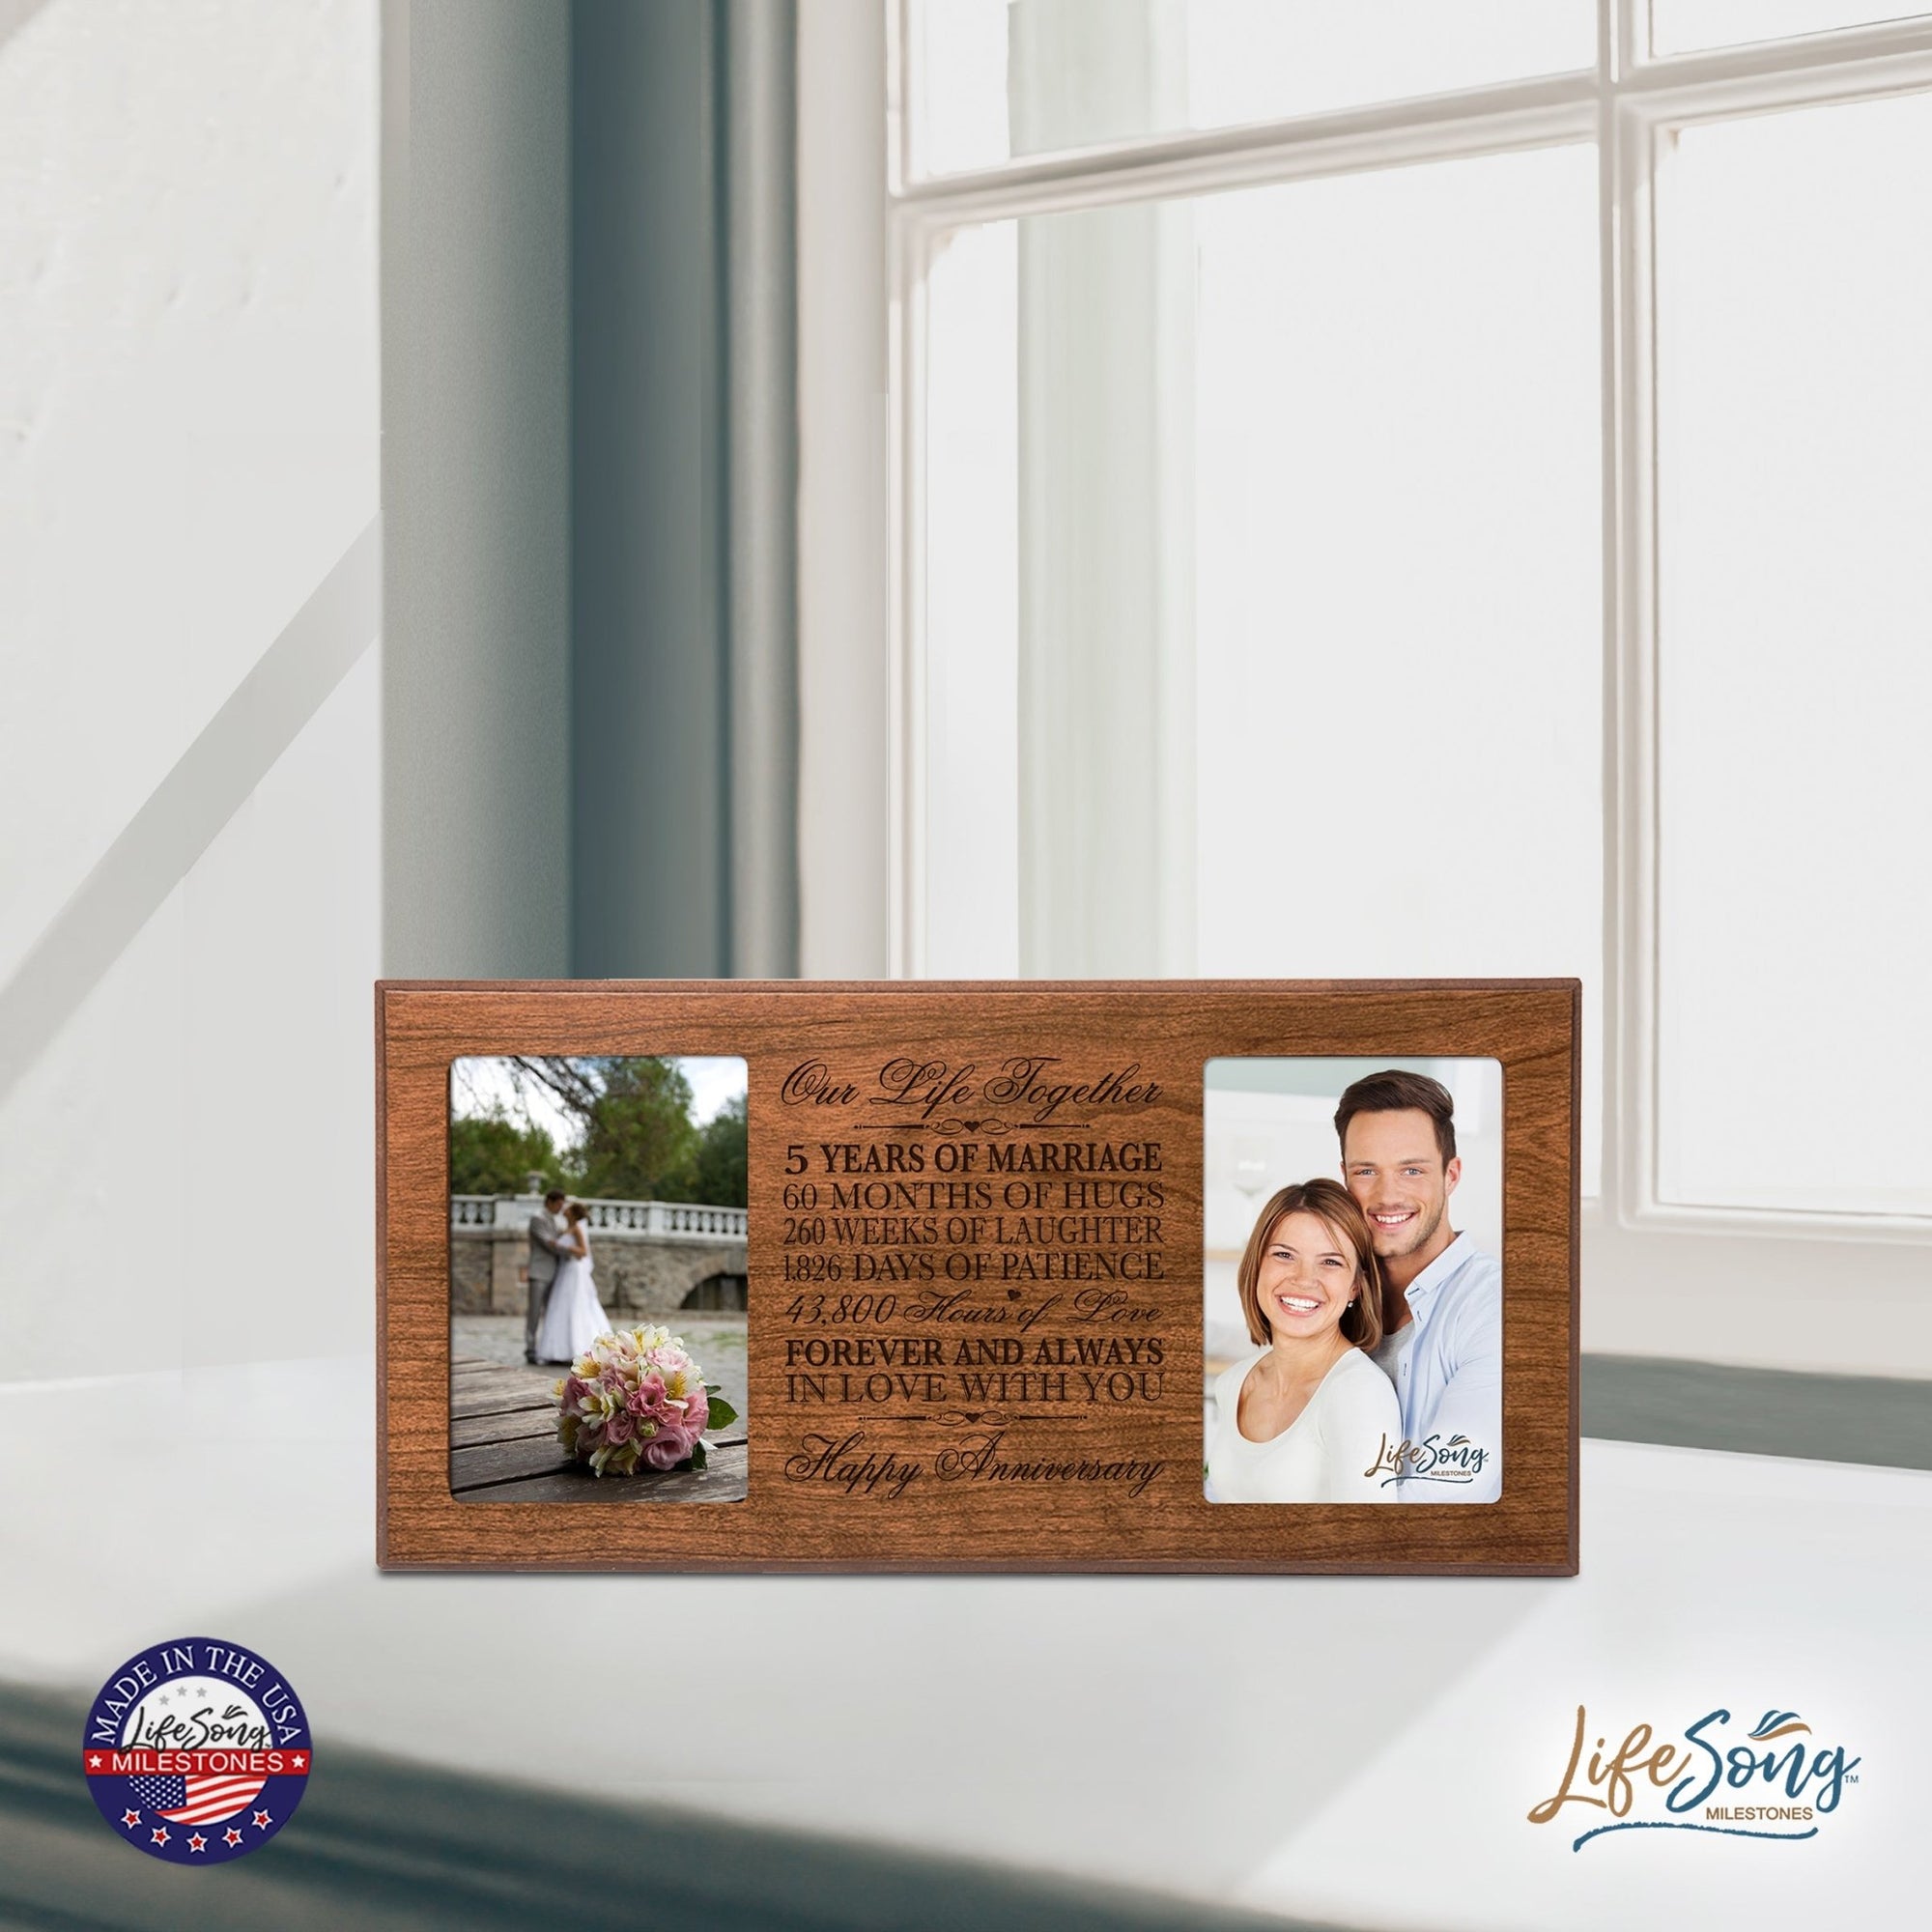 LifeSong Milestones 5th Wedding Anniversary Picture frame Gift with anniversary dates holds 2 4x6 photos - LifeSong Milestones